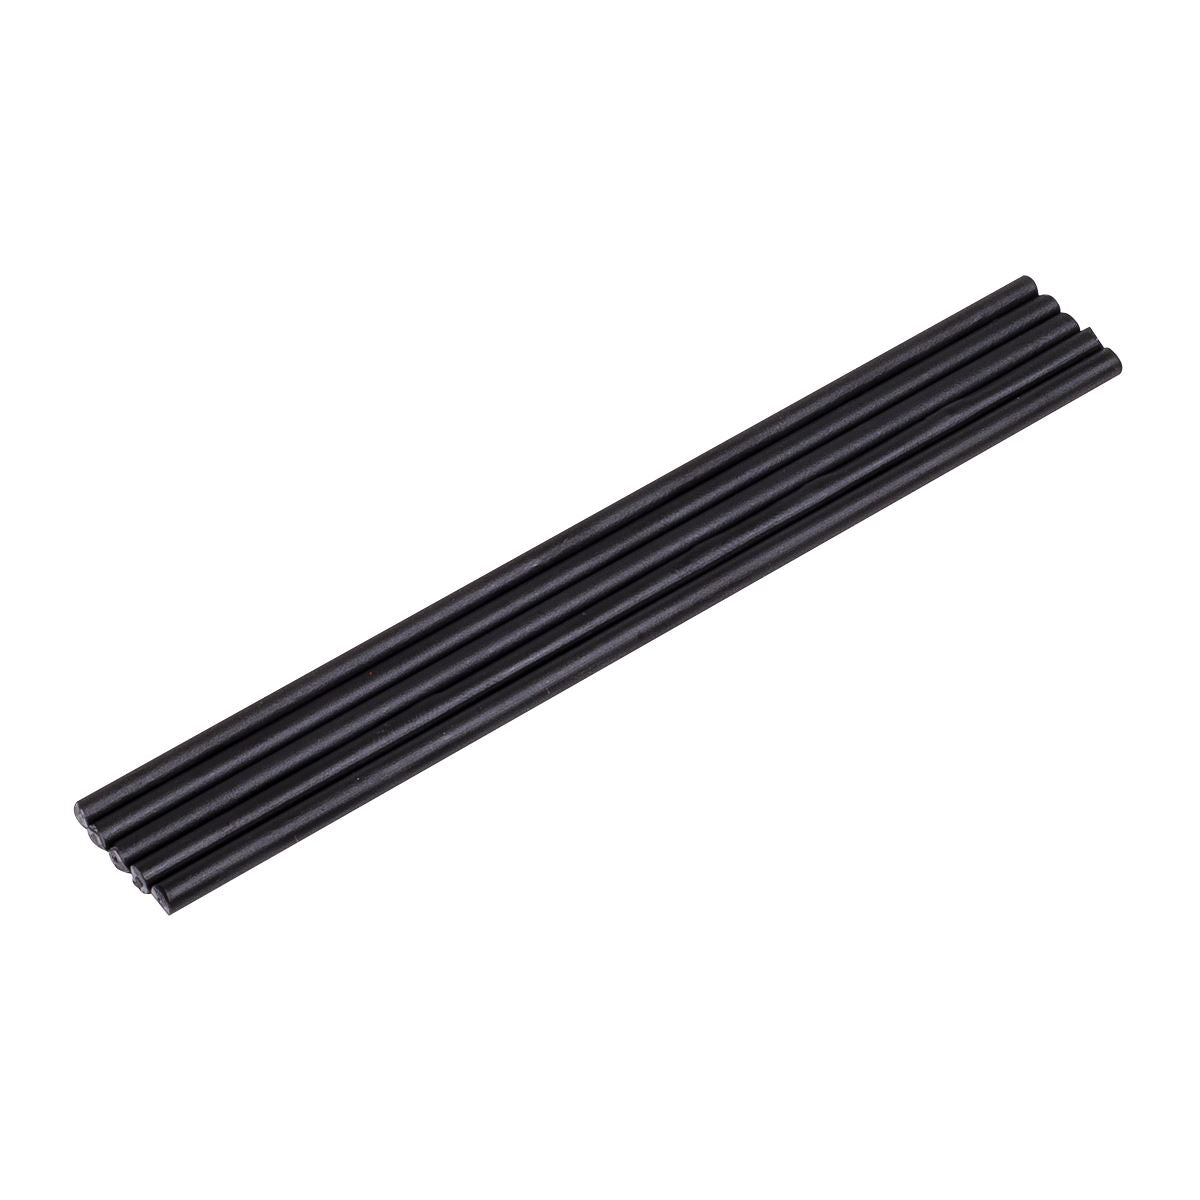 Sealey PS Plastic Welding Rod - Pack of 5